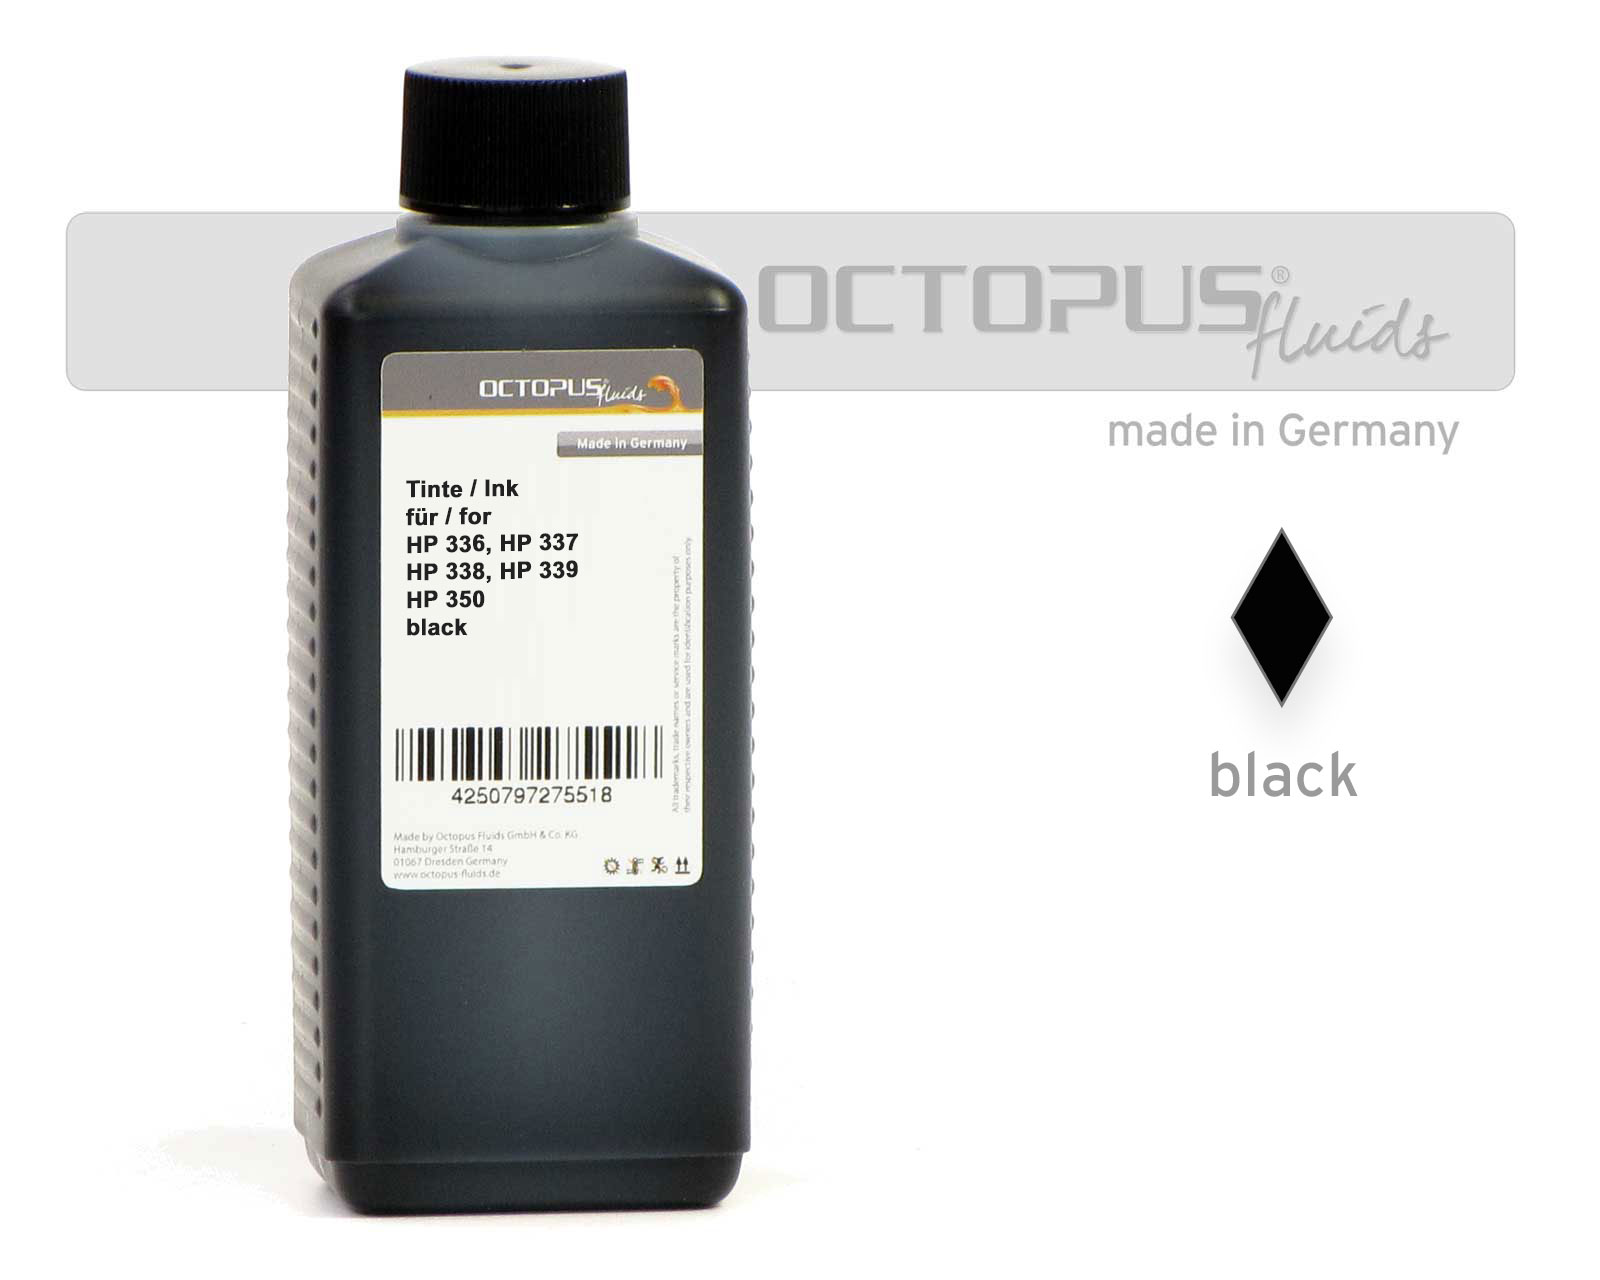 Octopus Refill Ink for HP 336, 337, 338, 339, 350, 350 XL pigmented black